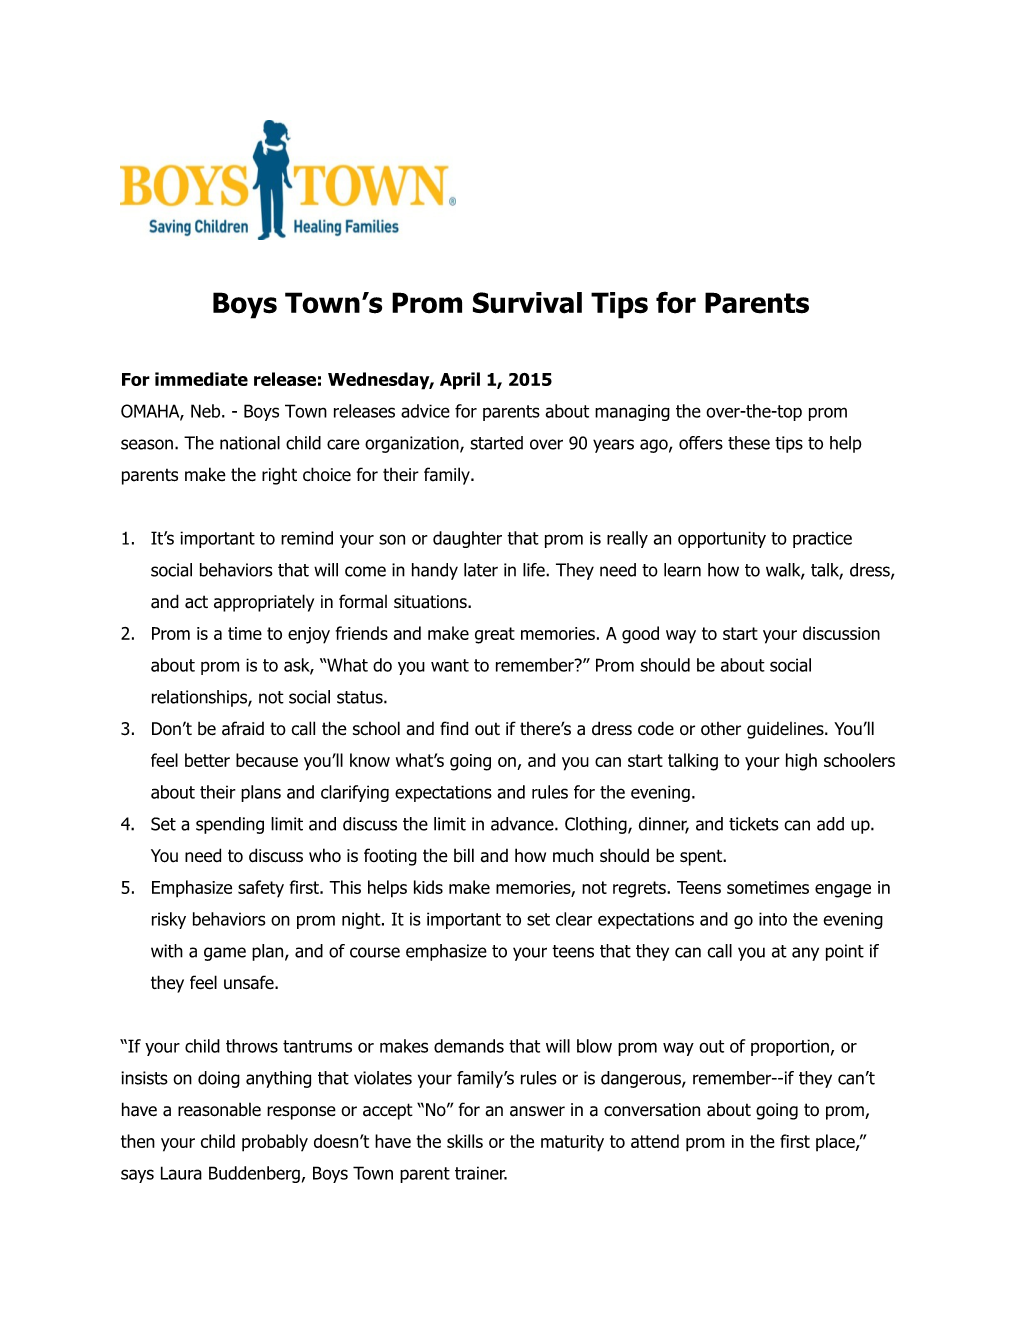 Boys Town S Prom Survival Tips for Parents